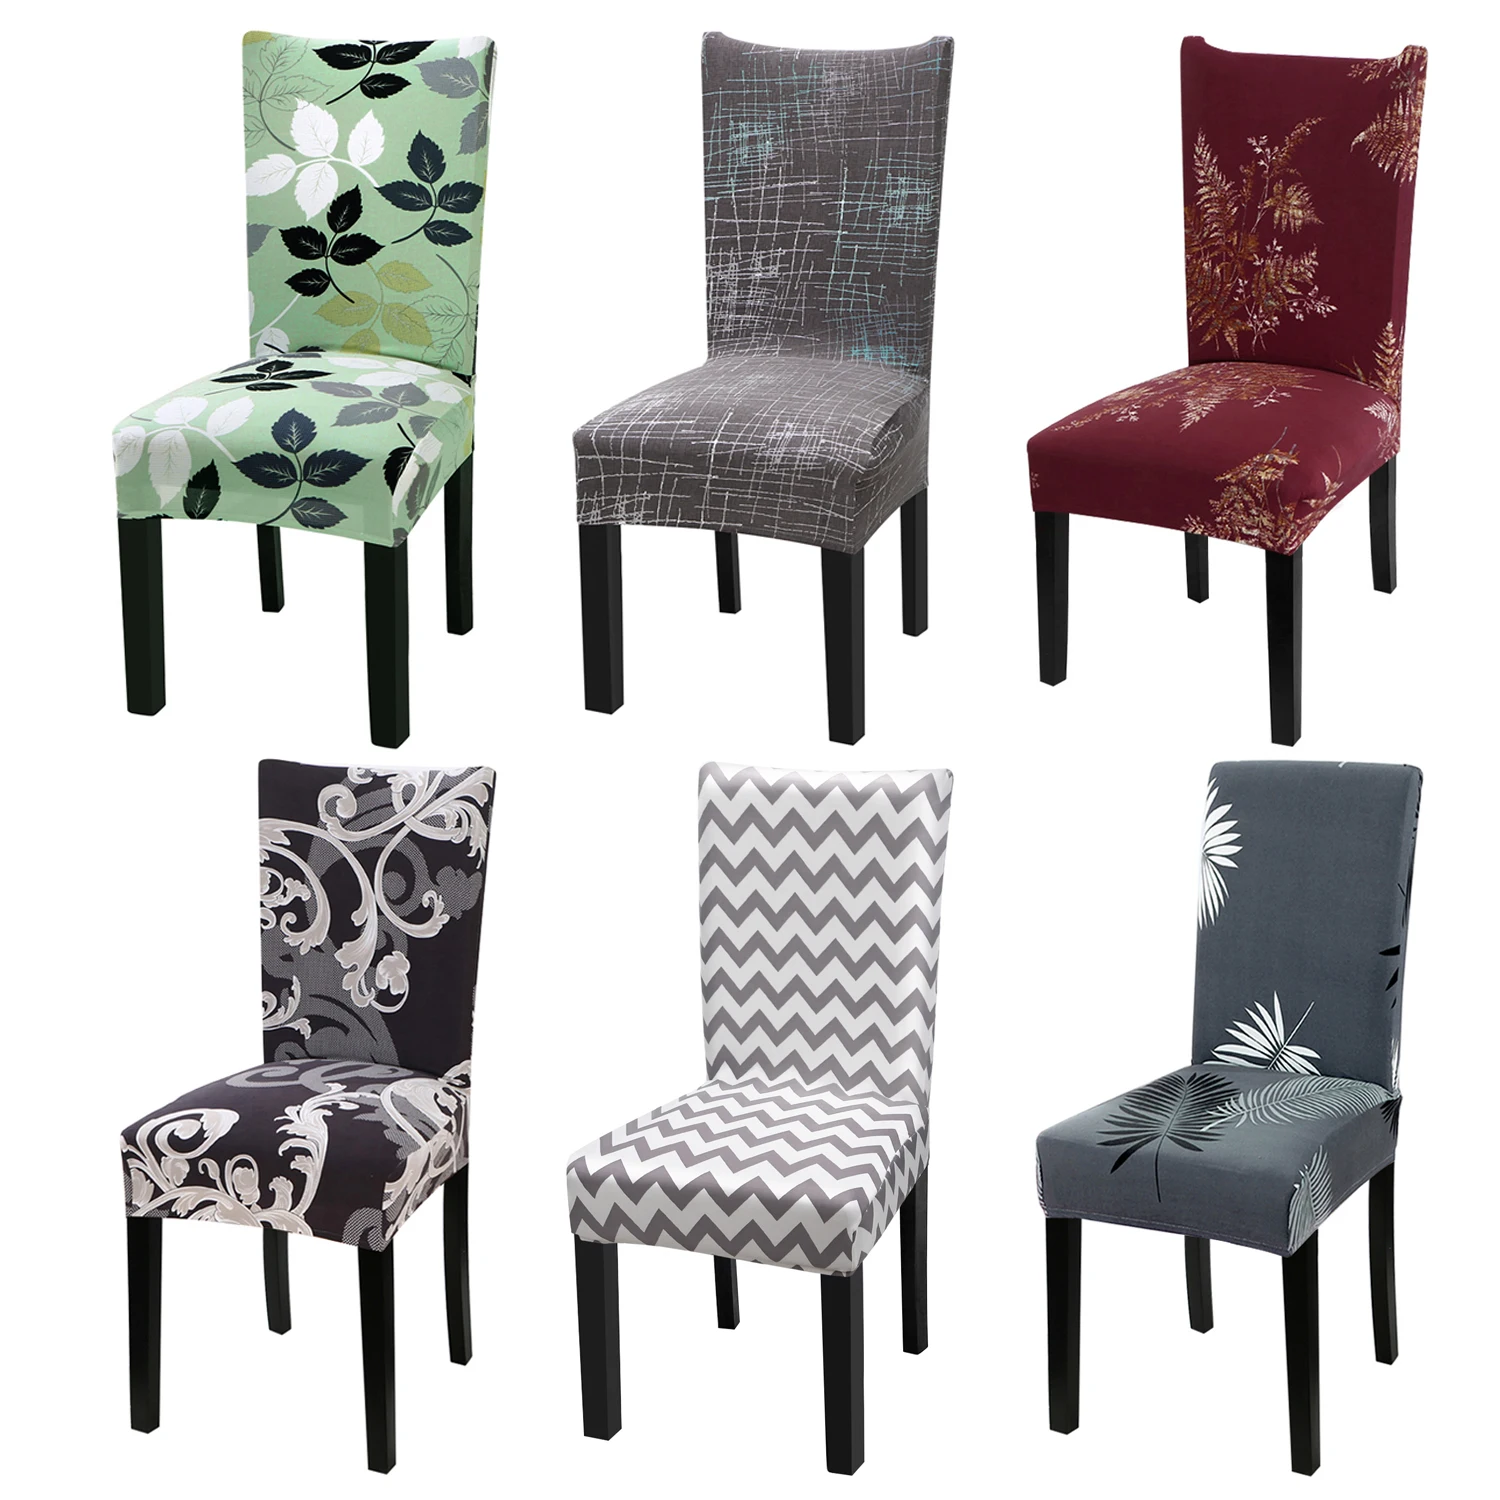 

2/4/6pcs Printed Elastic Stretch Chair Cover Spandex Dinning Room Kitchen Chair Slipcovers Protector For Wedding Banquet Party